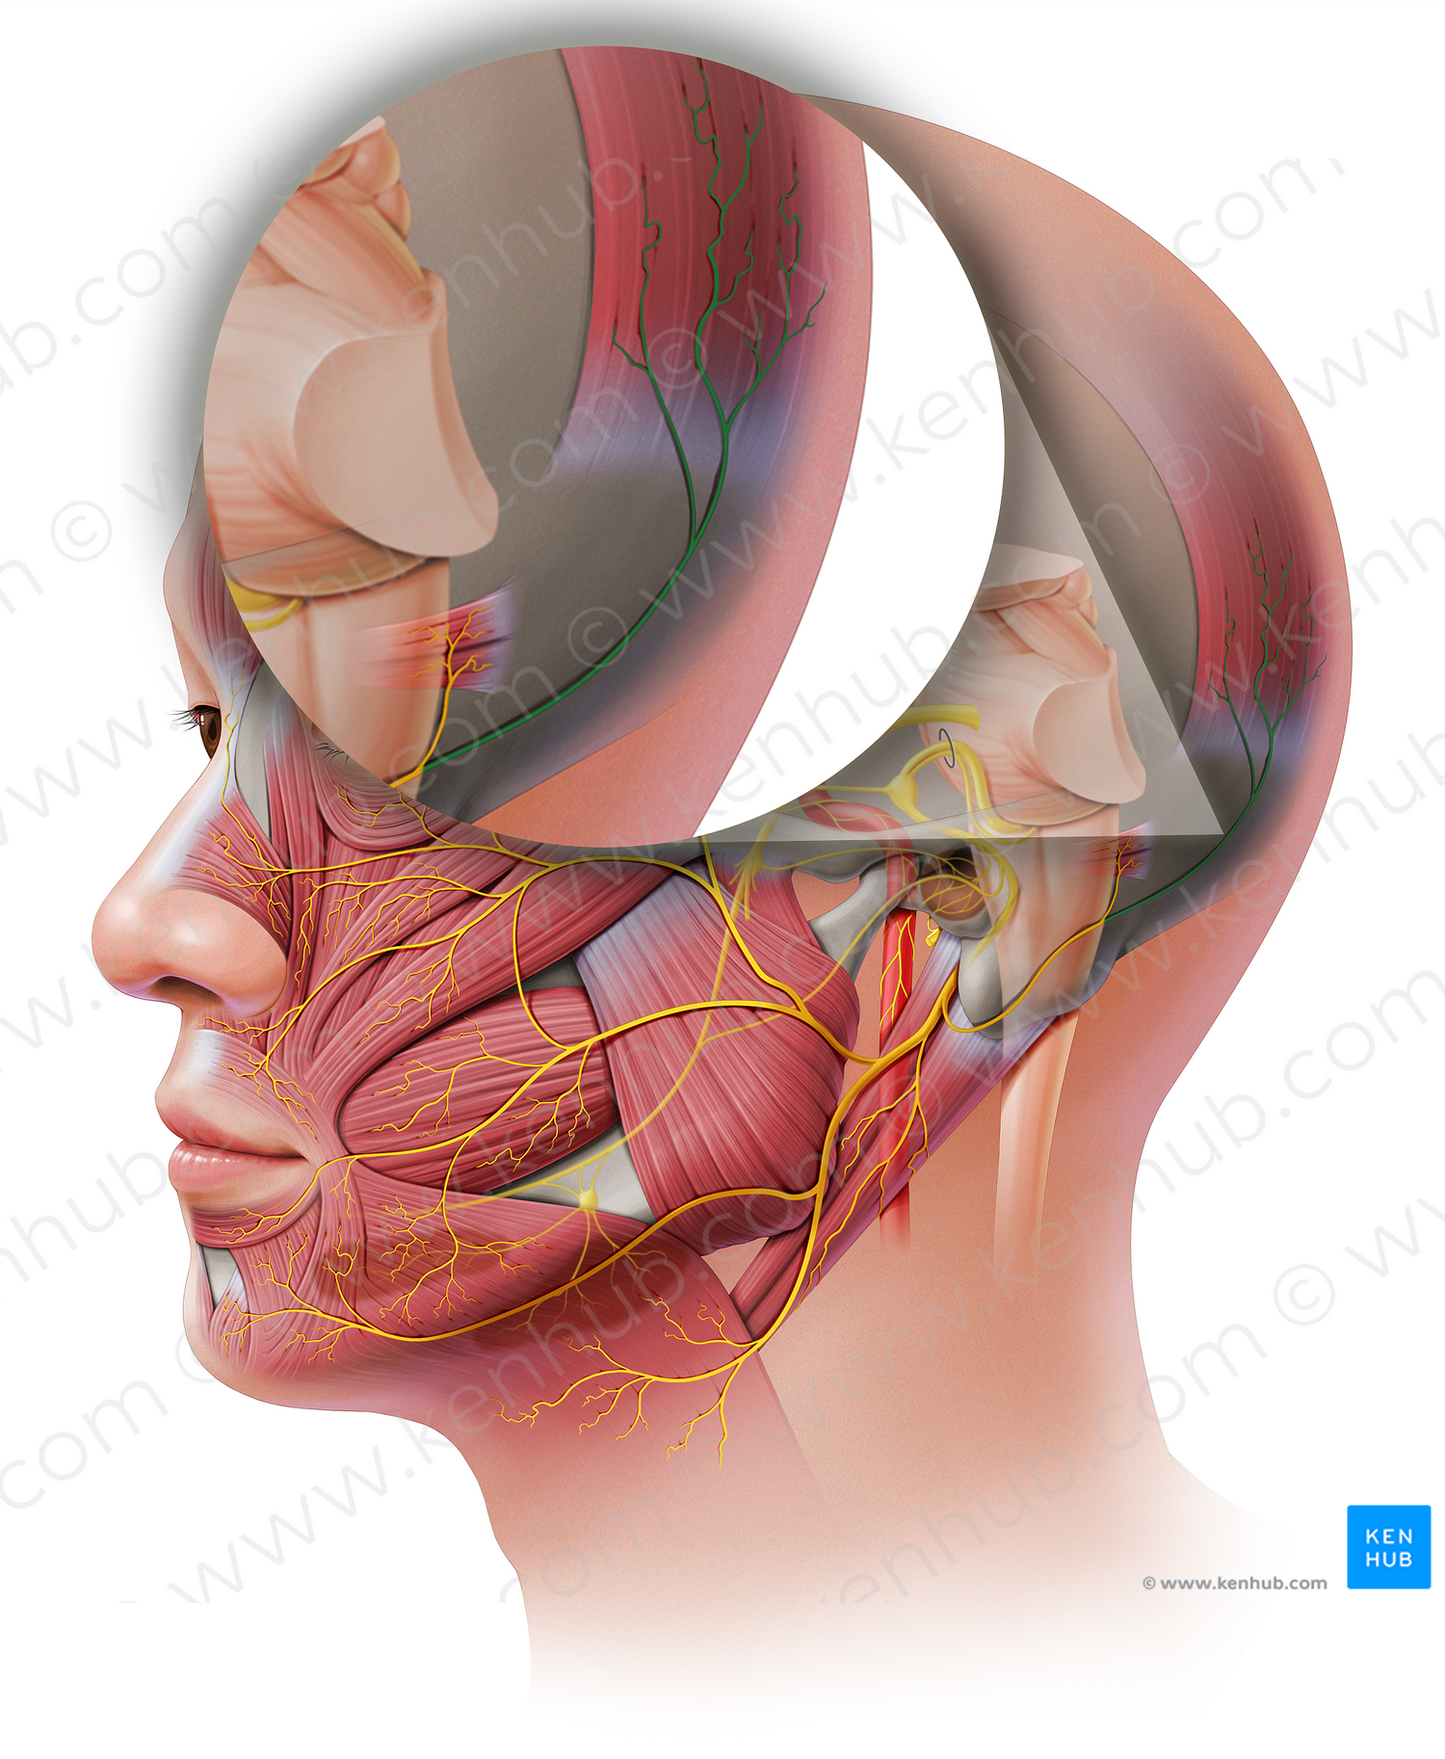 Occipital branch of posterior auricular nerve (#8763)